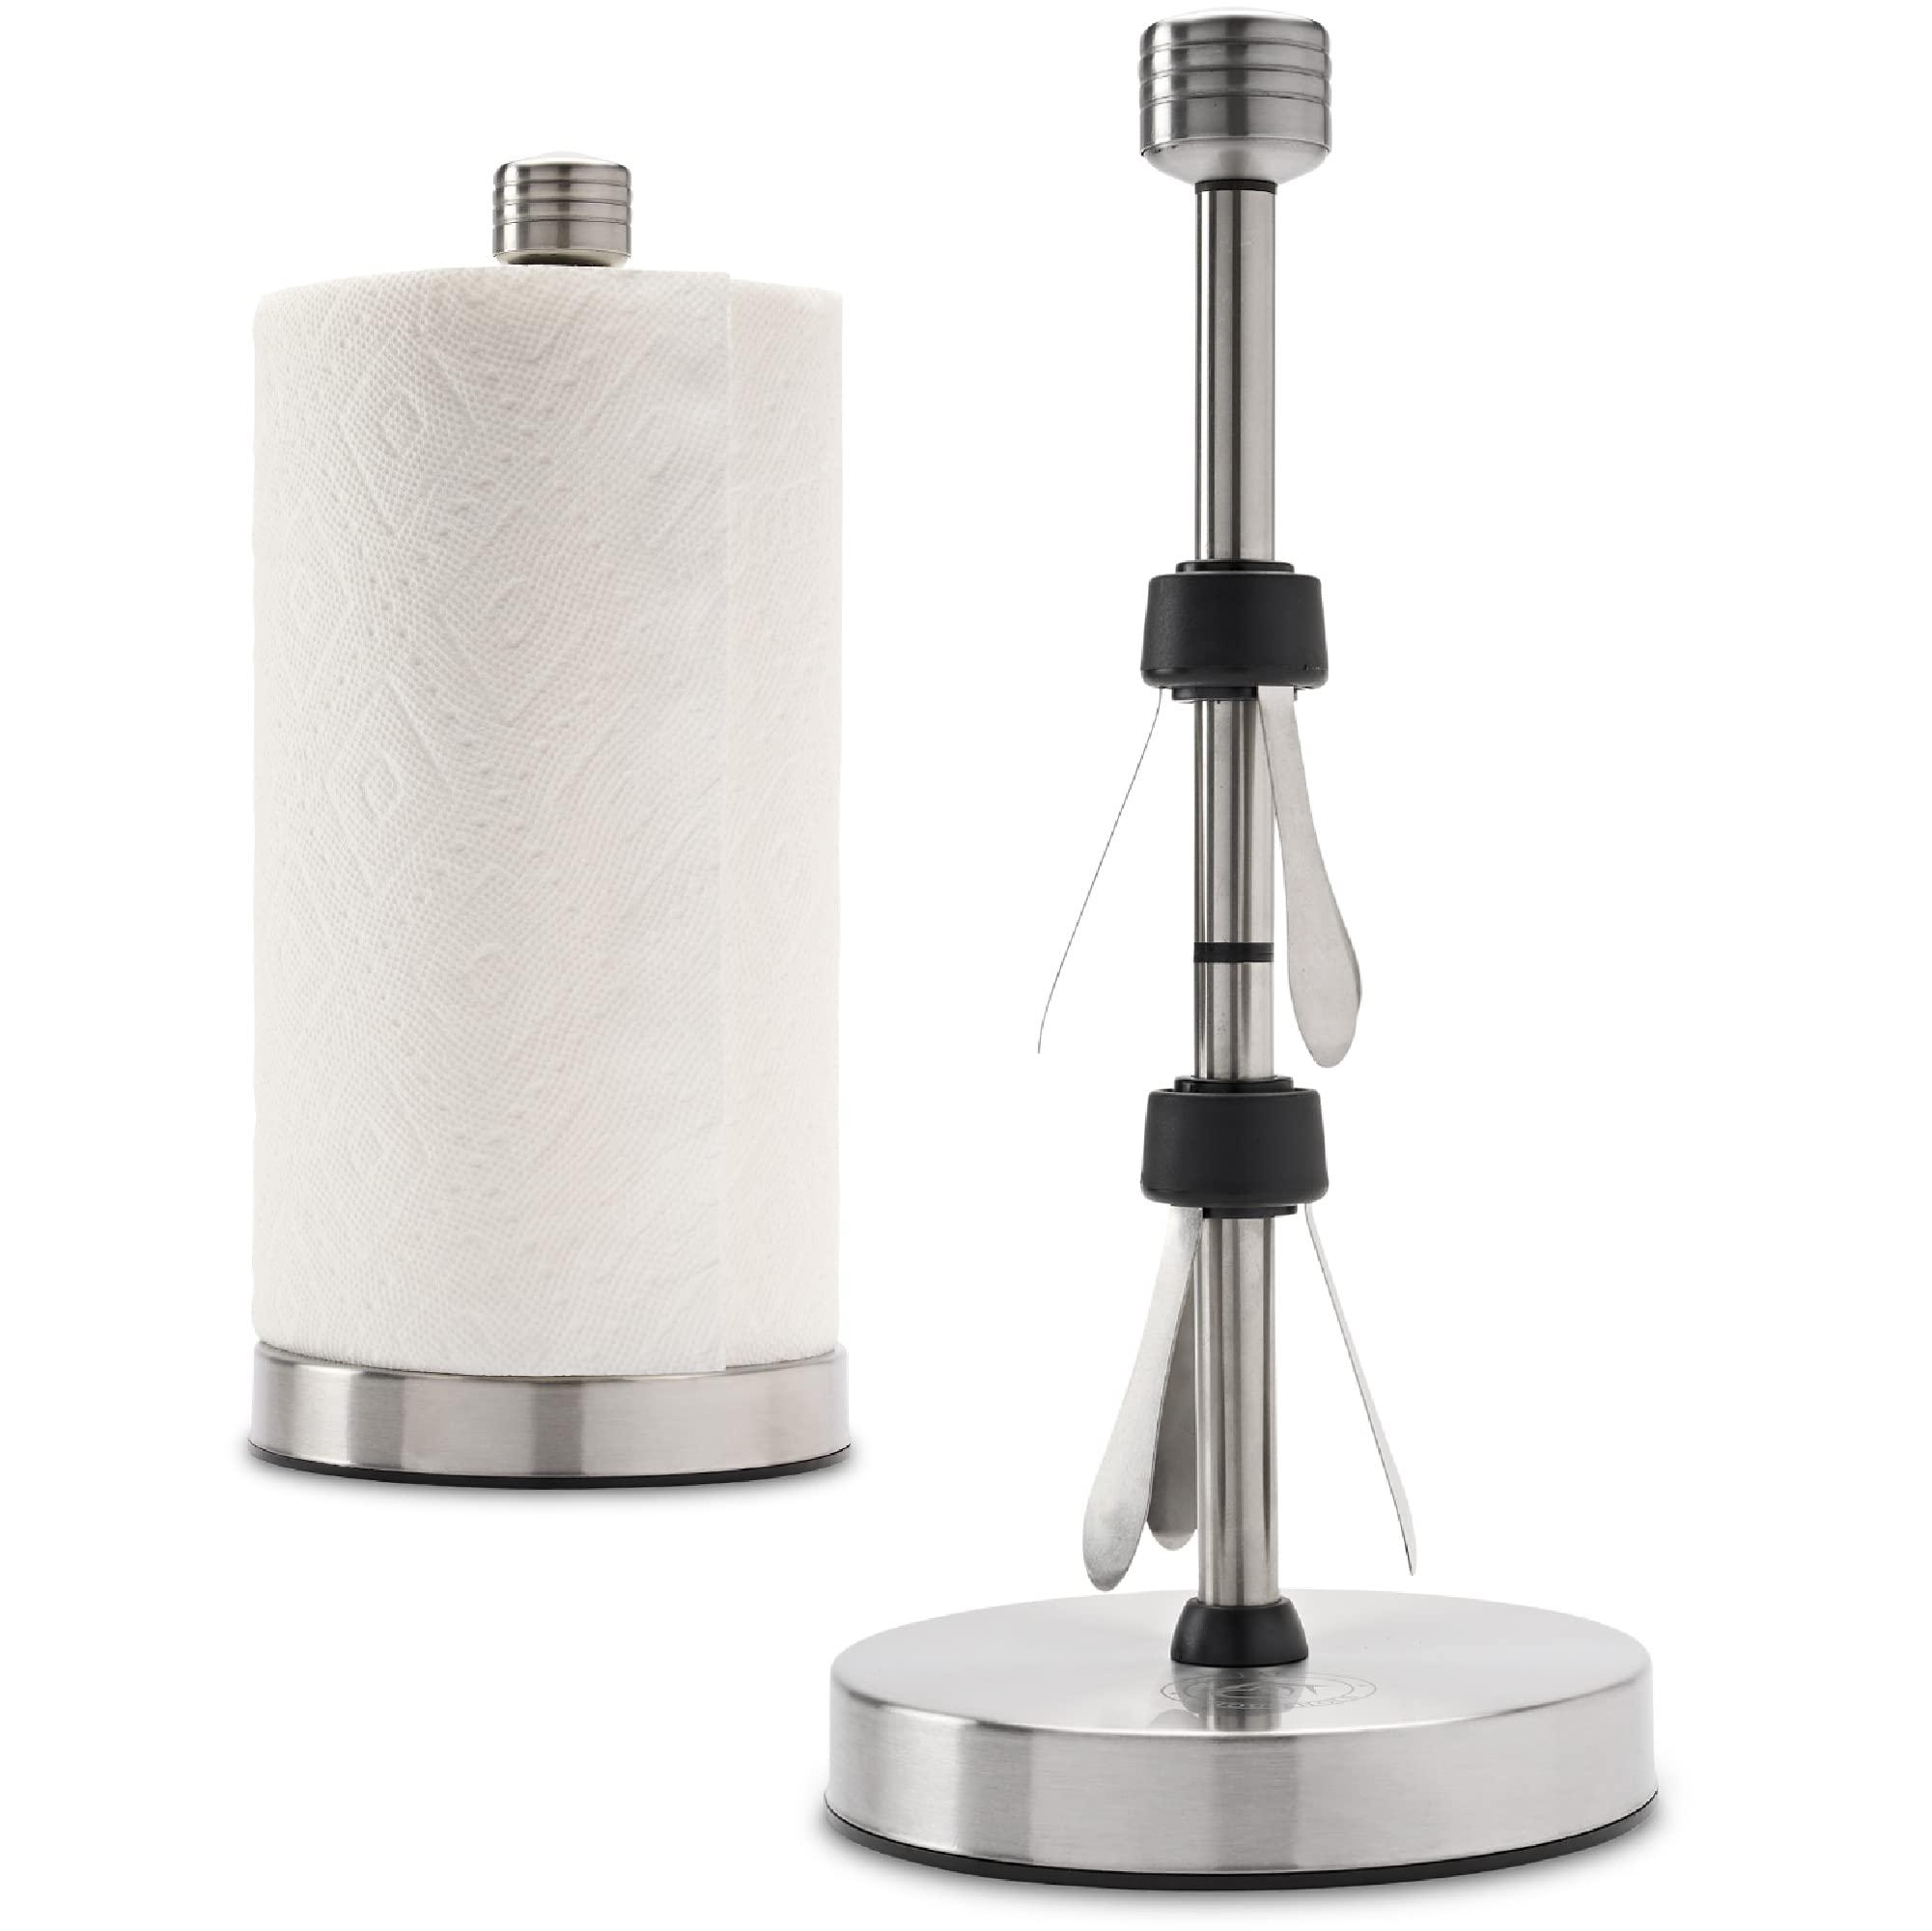 Dear Household stainless steel paper towel holder stand designed for easy one- handed operation - this sturdy weighted paper towel holder co